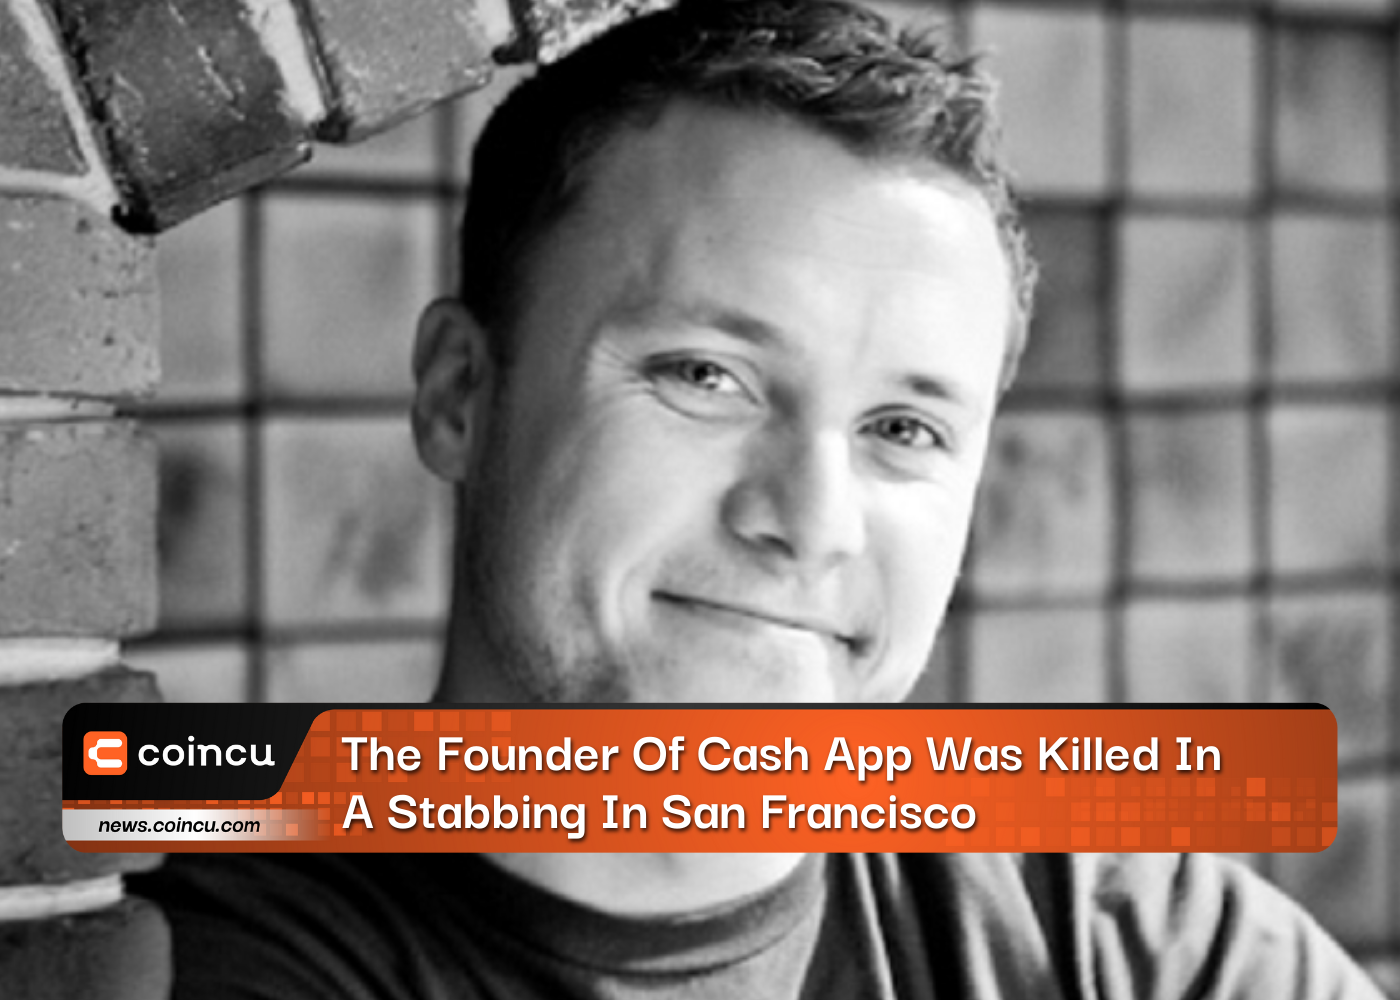 The Founder Of Cash App Was Killed In A Stabbing In San Francisco